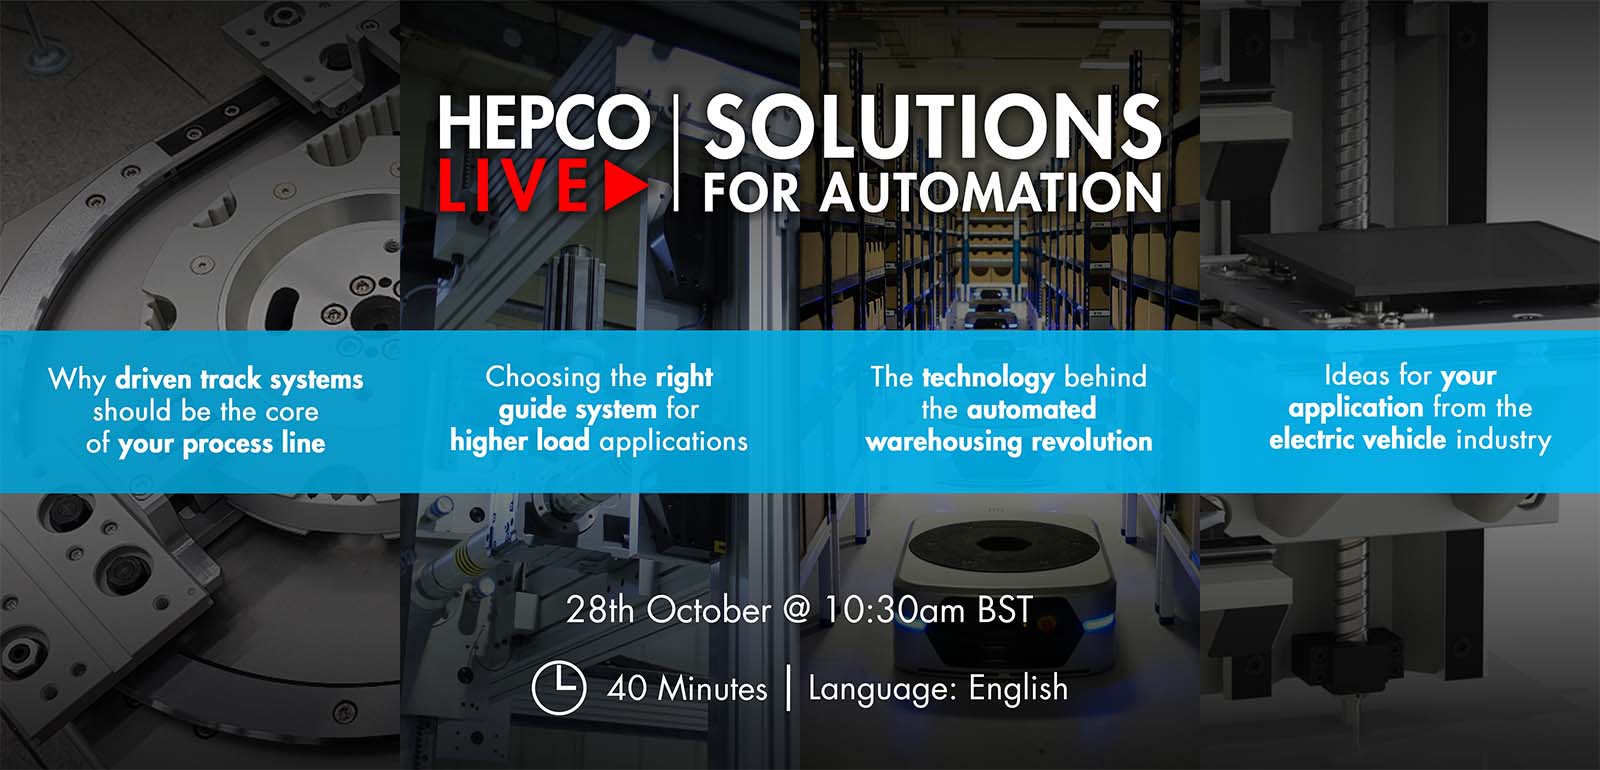 Hepco Live on October 28th – Solutions for Automation